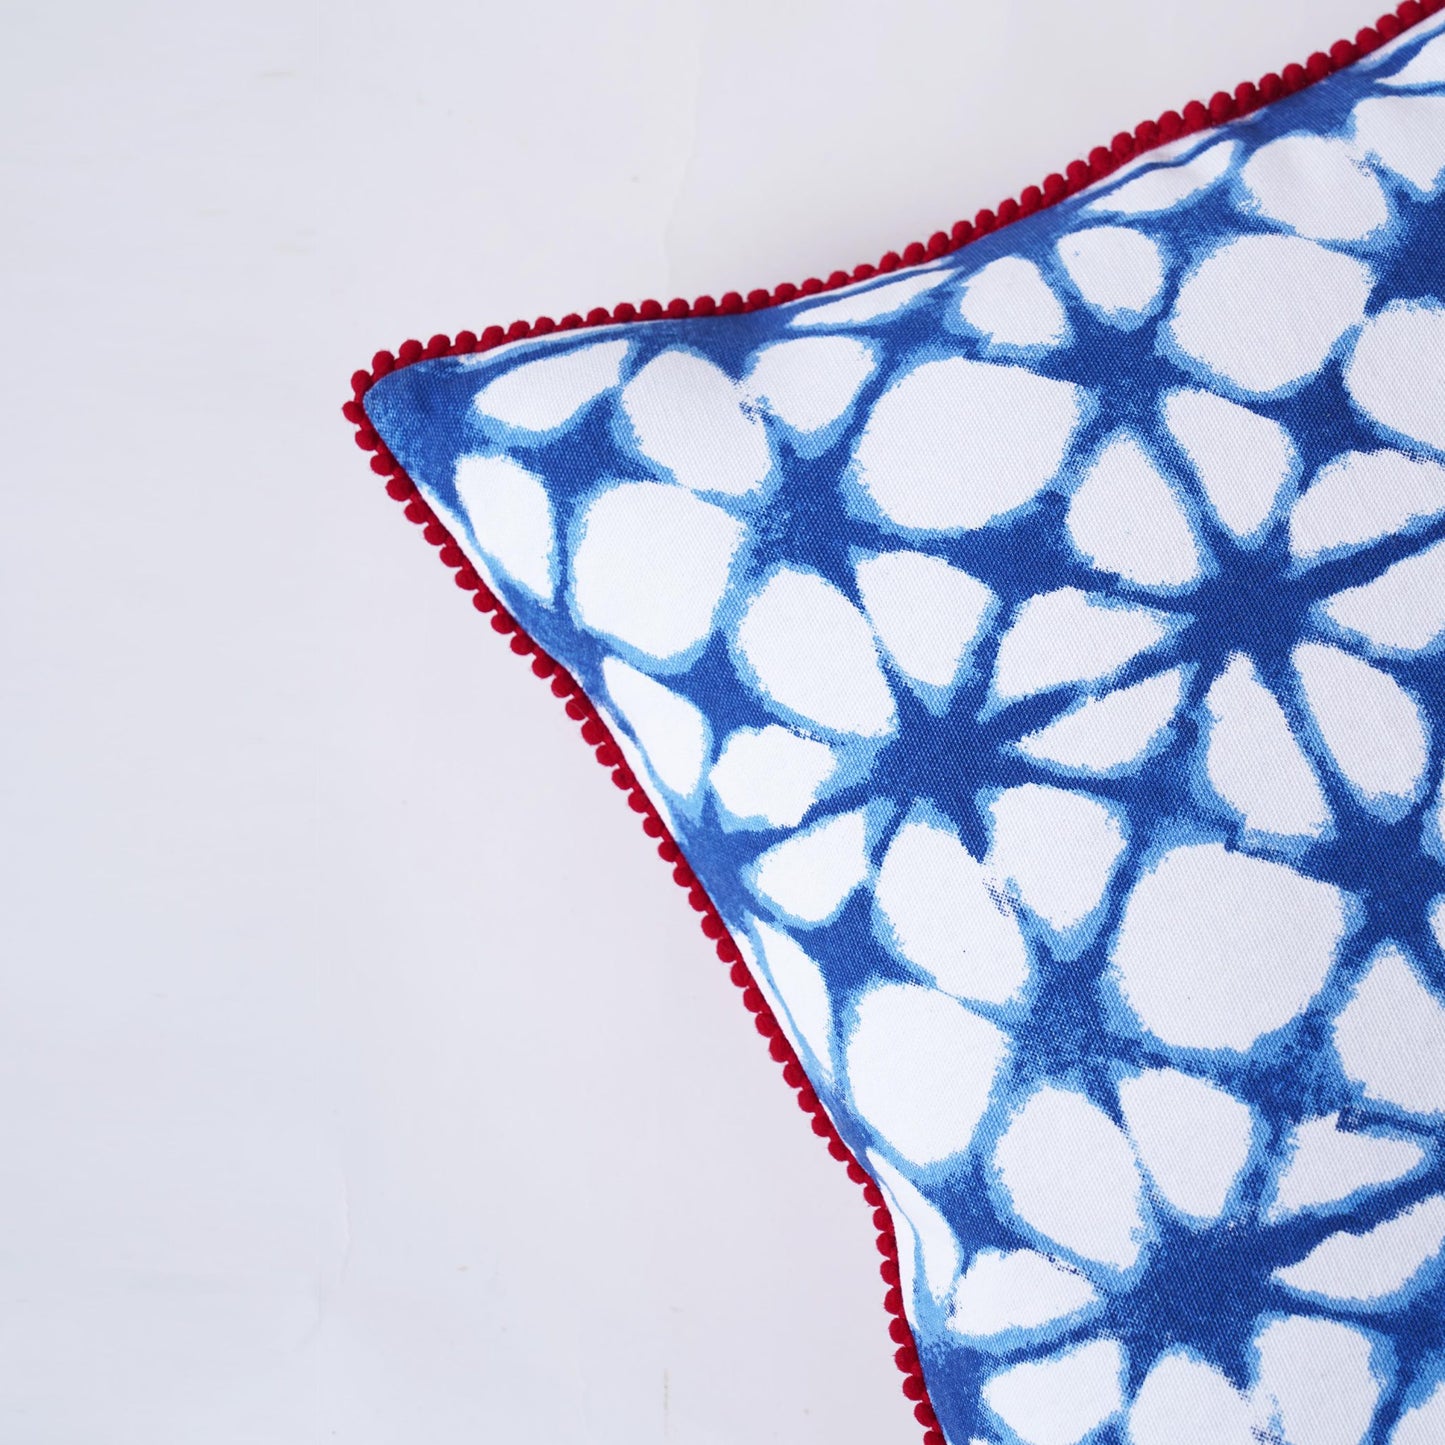 Pillow cover, Tie dye prism pattern, Blue and white, standard size 16X16 inches, other sizes available